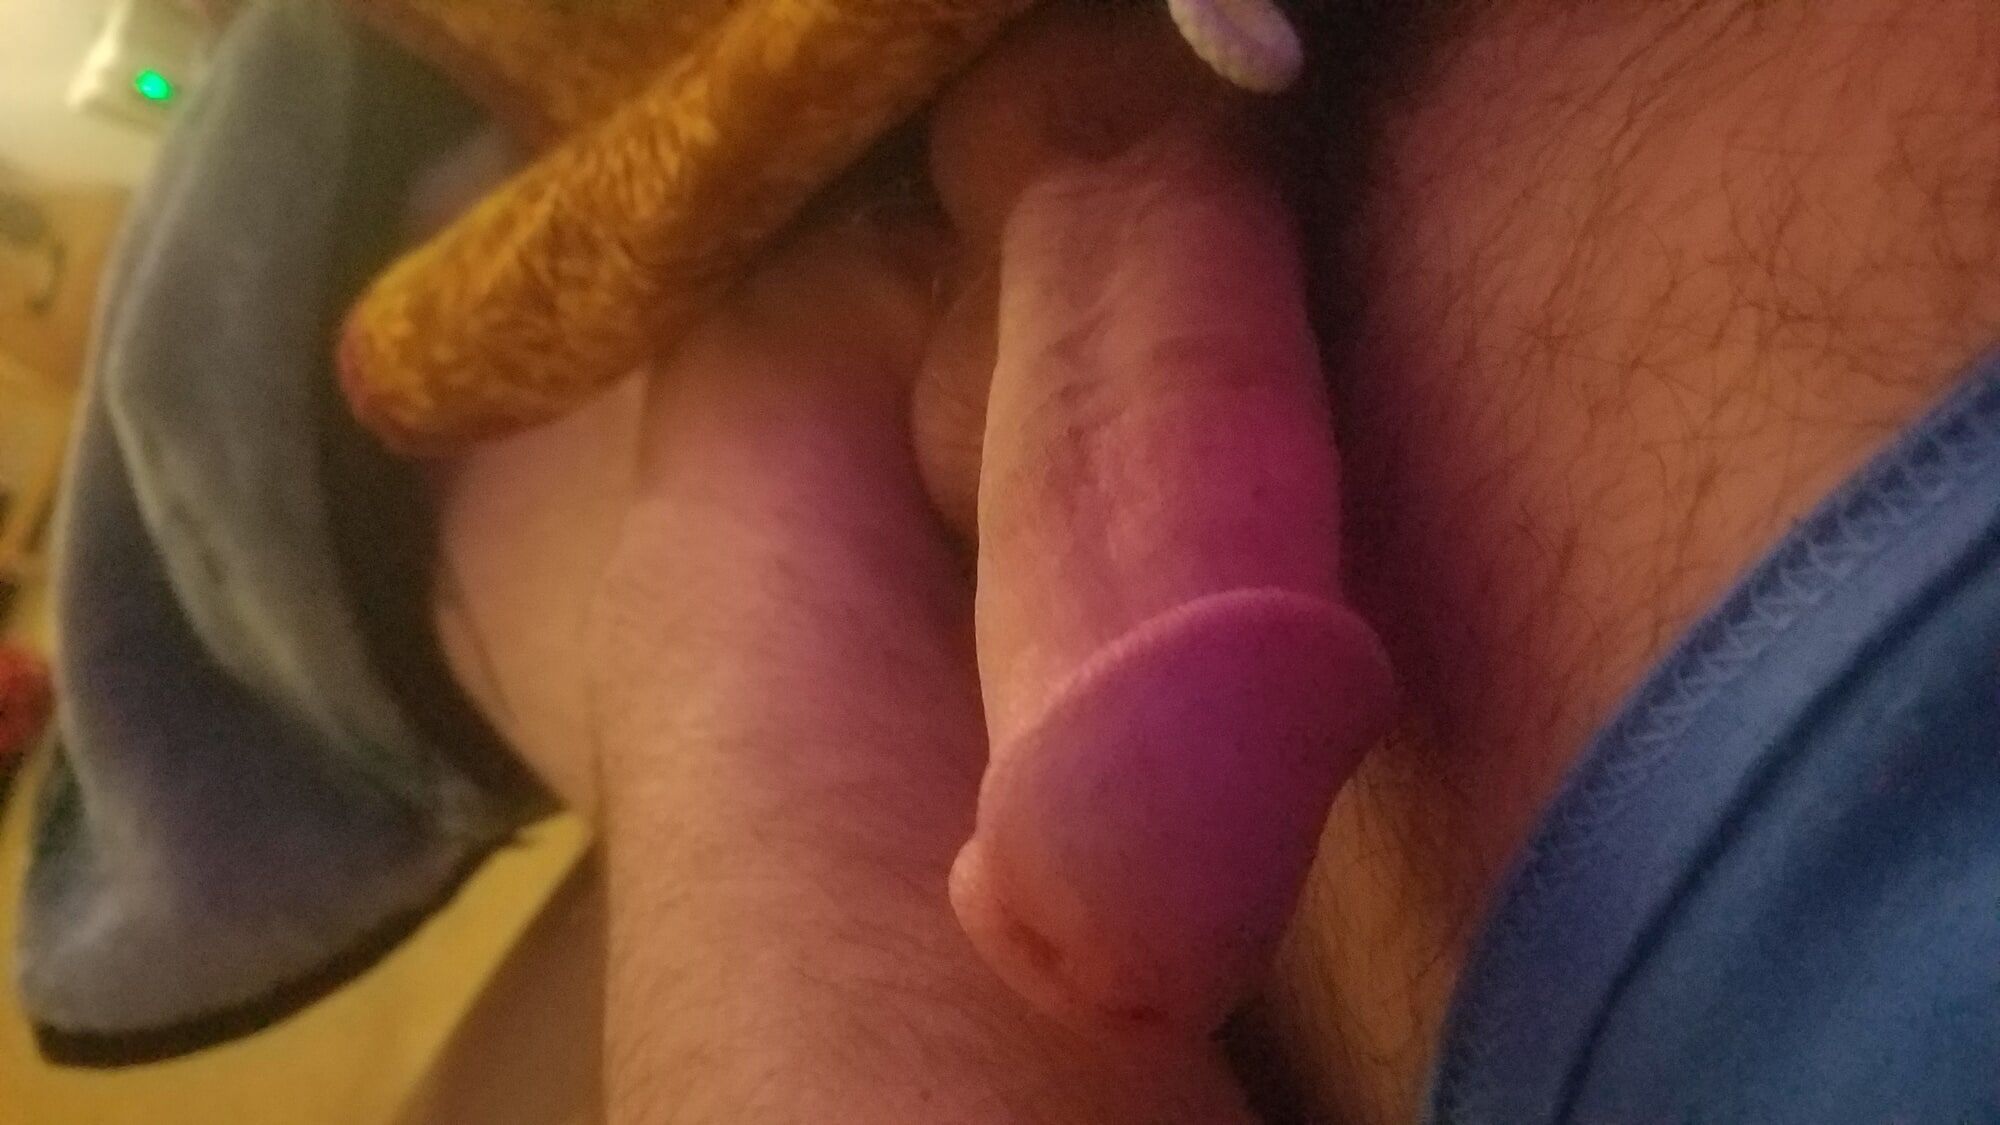 My hard cock ready for cum